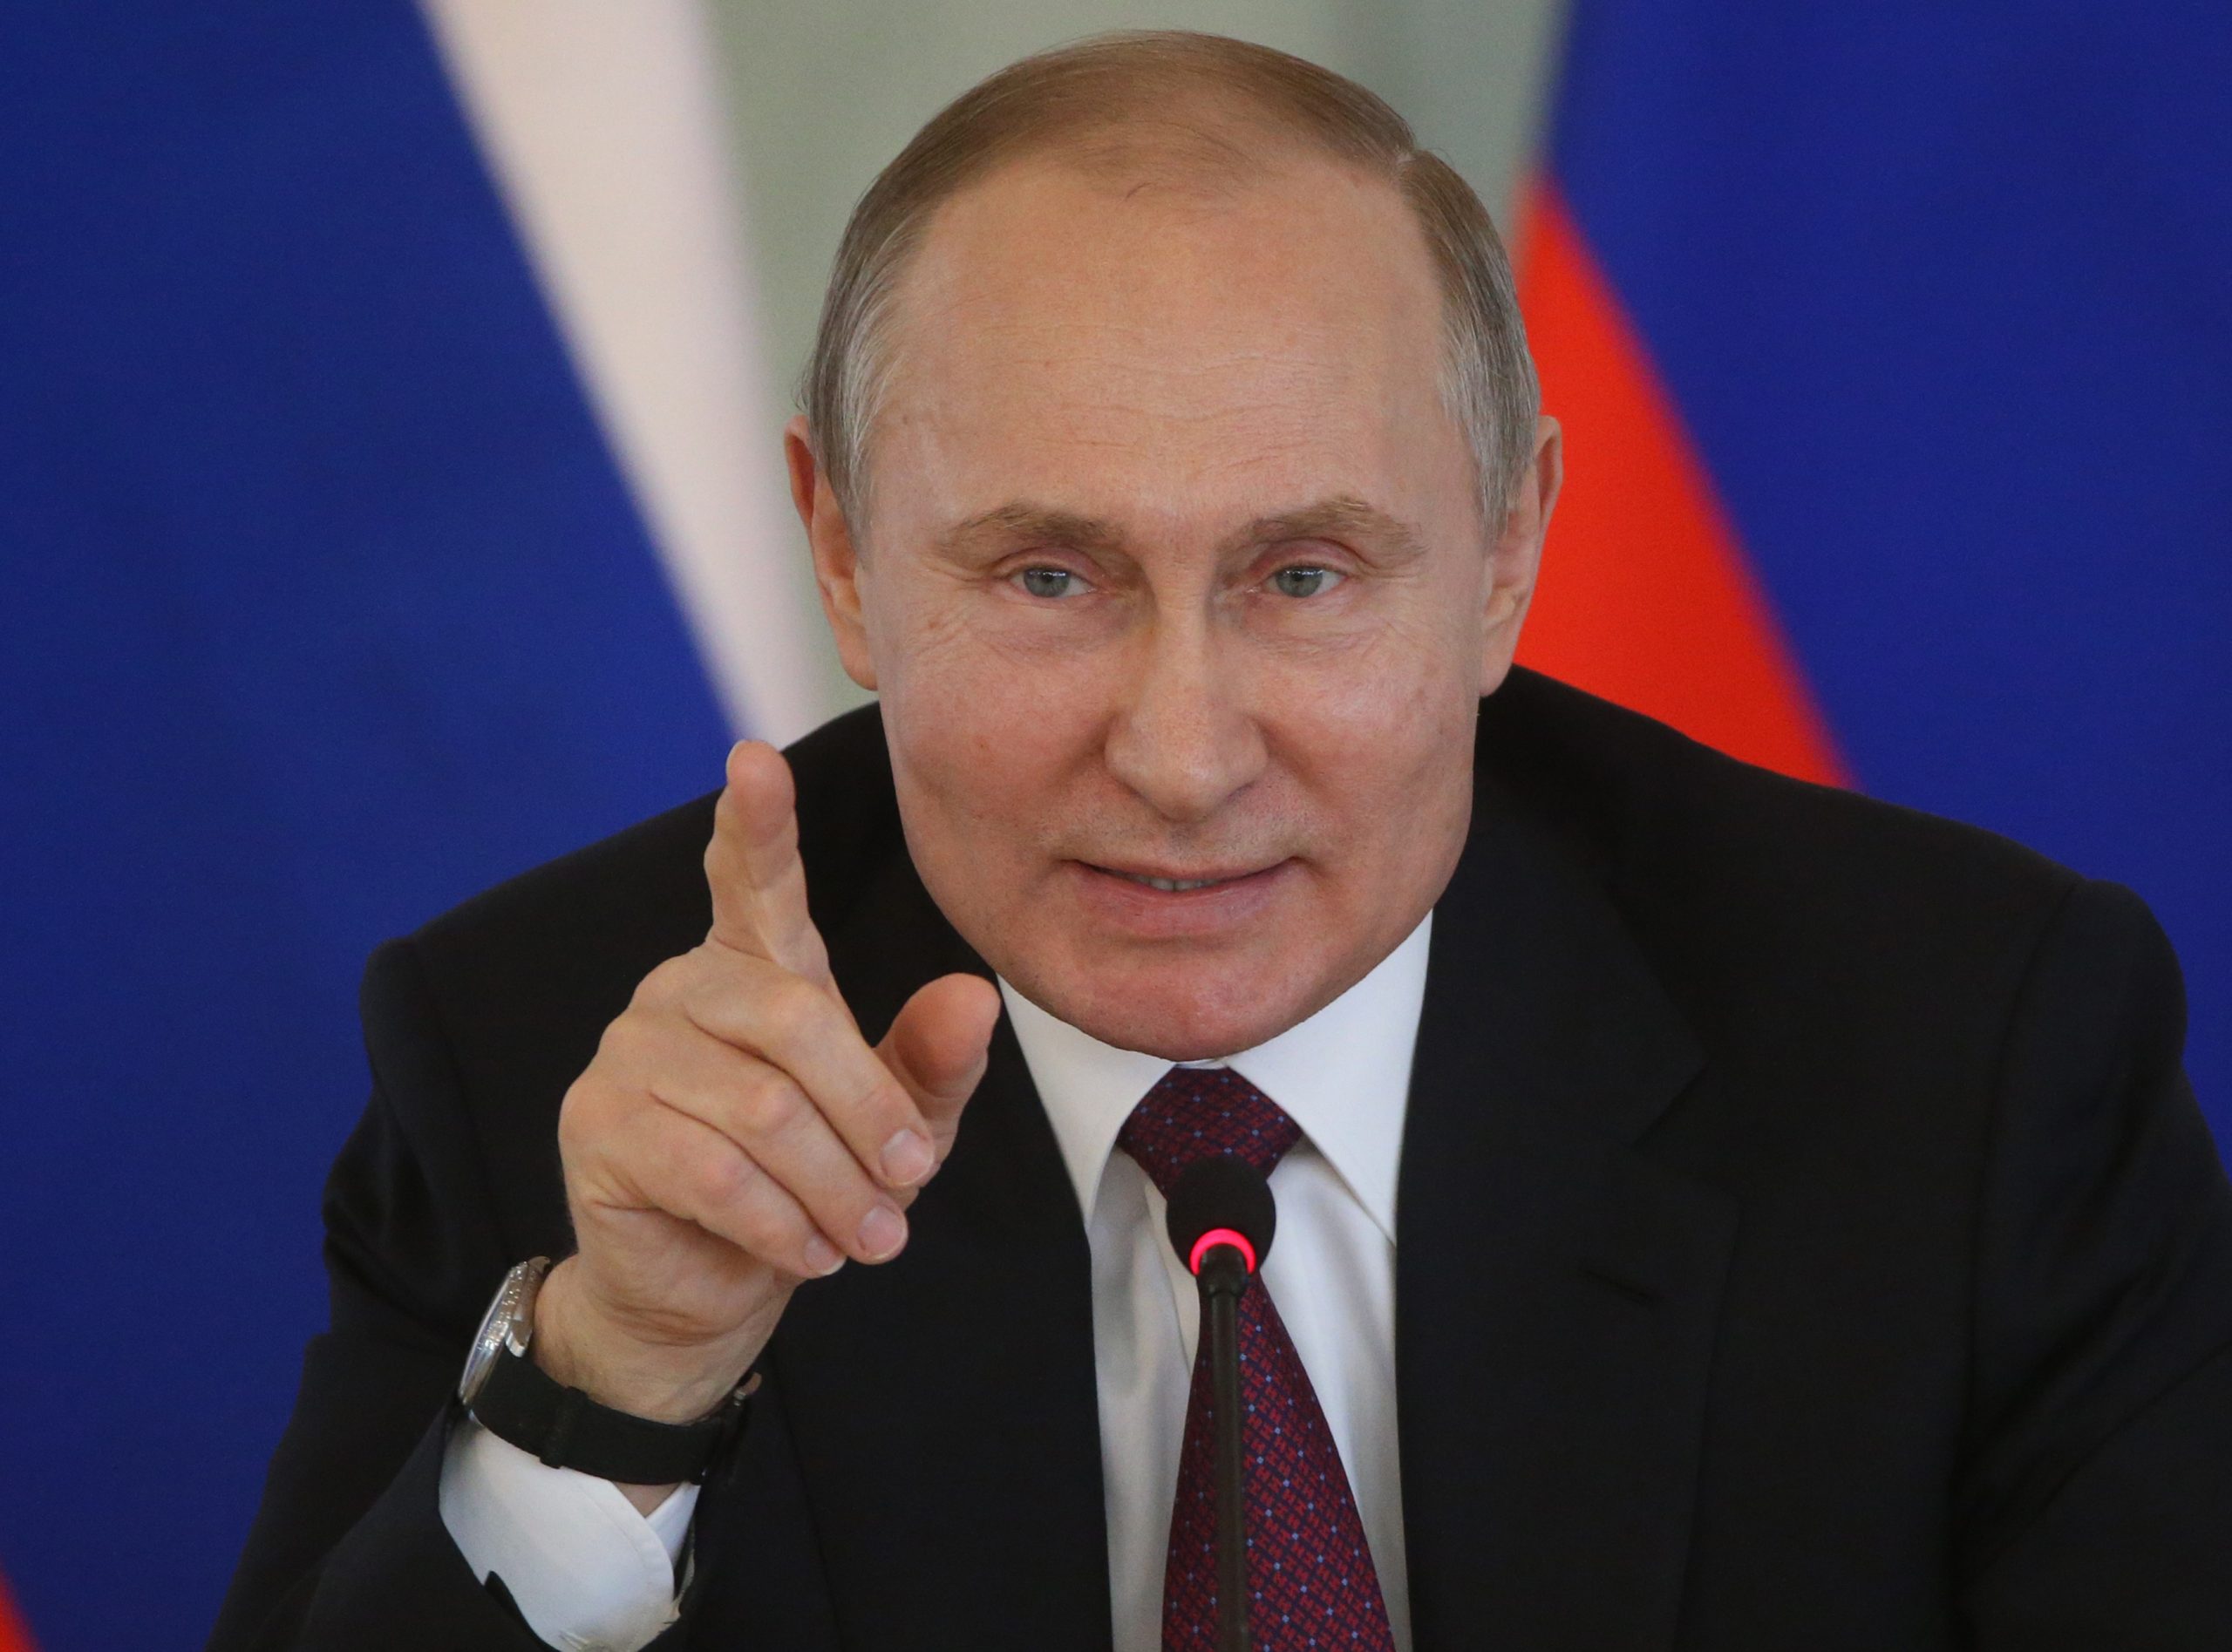 #Putin Offers £13000 To #Russian Mothers Who Gives Birth To 10 Children